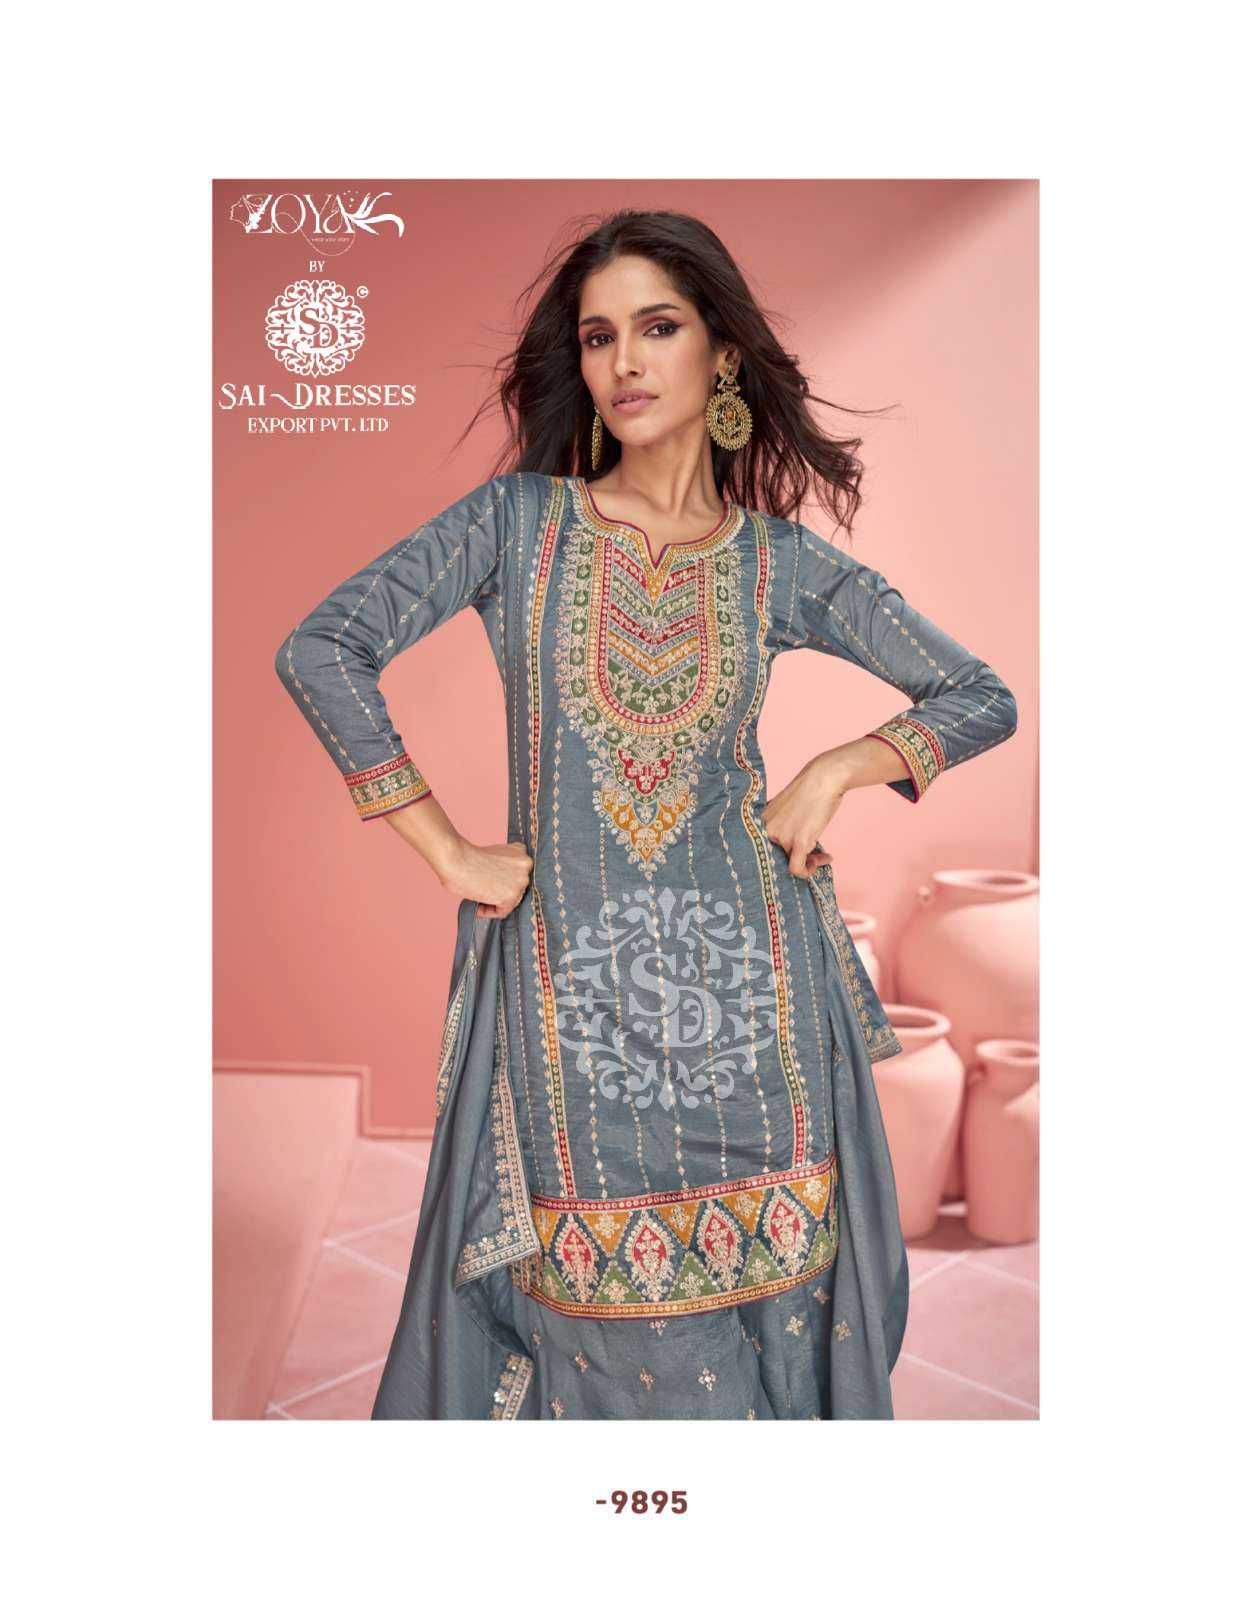 AMAYA READYMADE FESTIVE WEAR PLAZZO STYLE DESIGNER SUITS IN WHOLESALE RATE IN SURAT